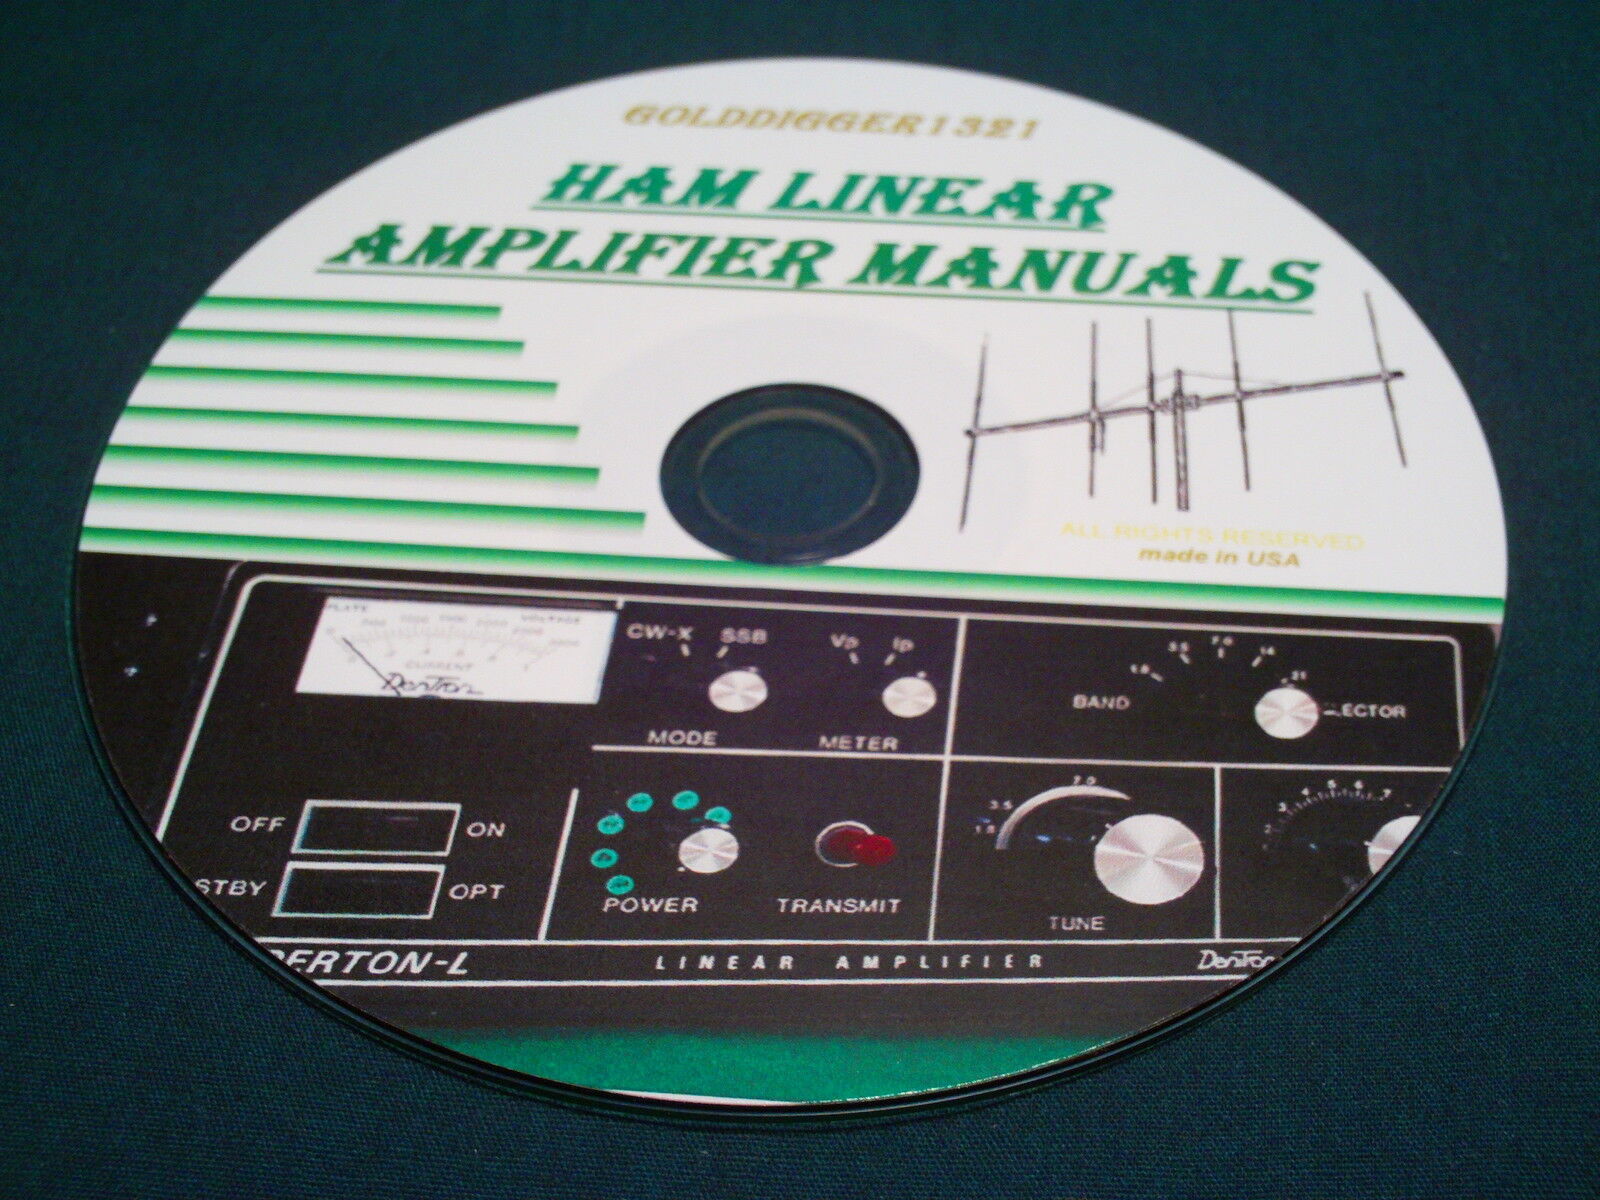 HAM LINEAR AMPLIFIER OWNER MANUALS ON CD